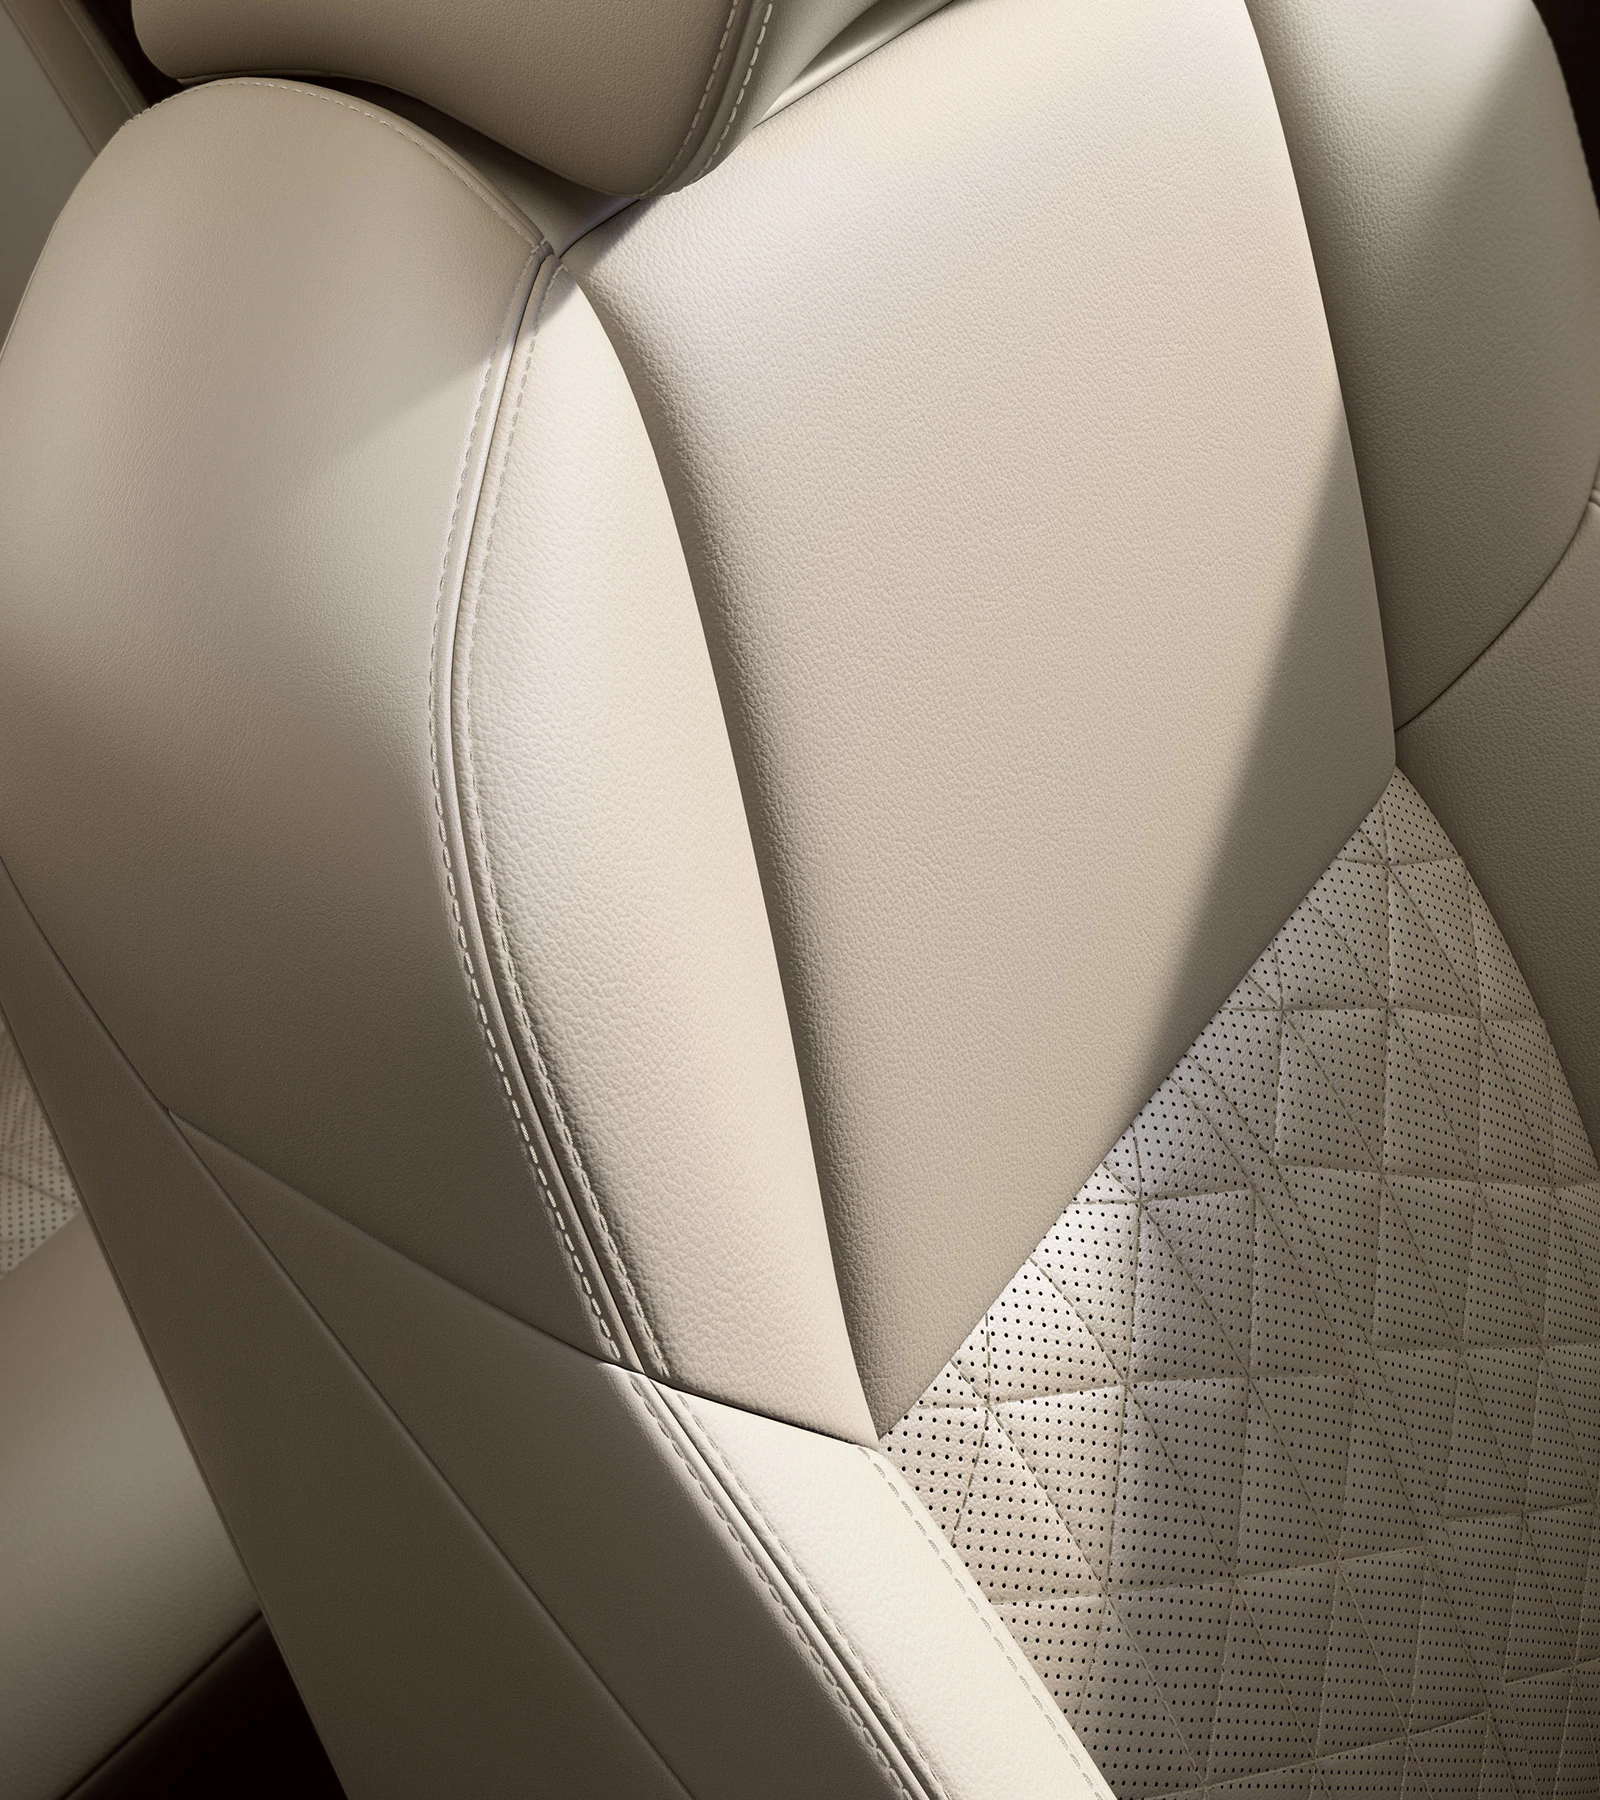 2019 Nissan Maxima with quilted leather-appointed seats